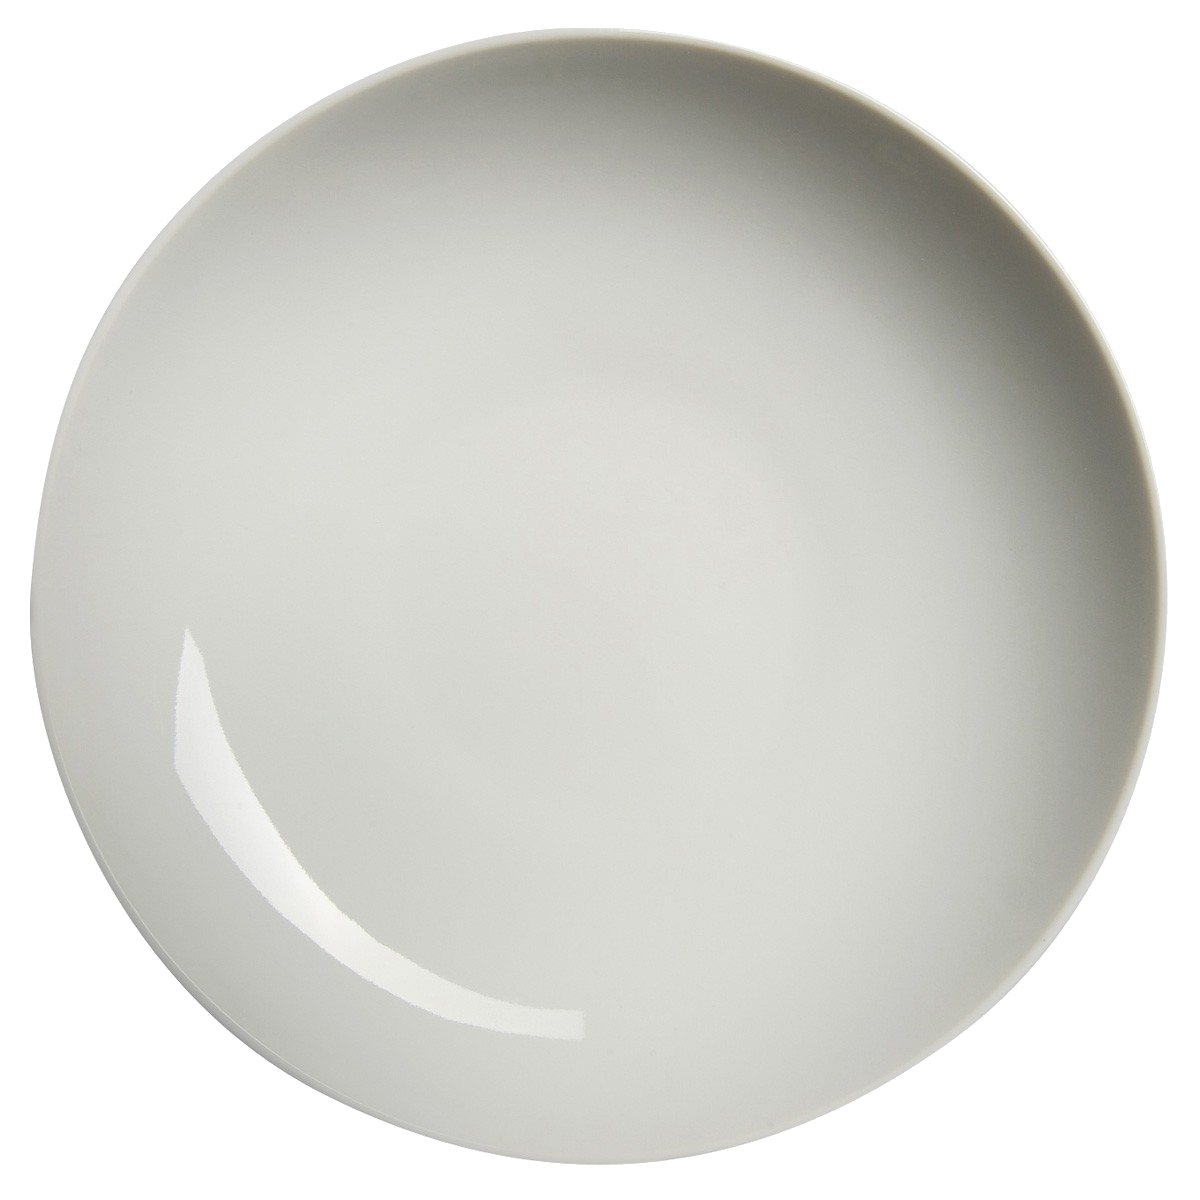 White Plate Transparent PNG